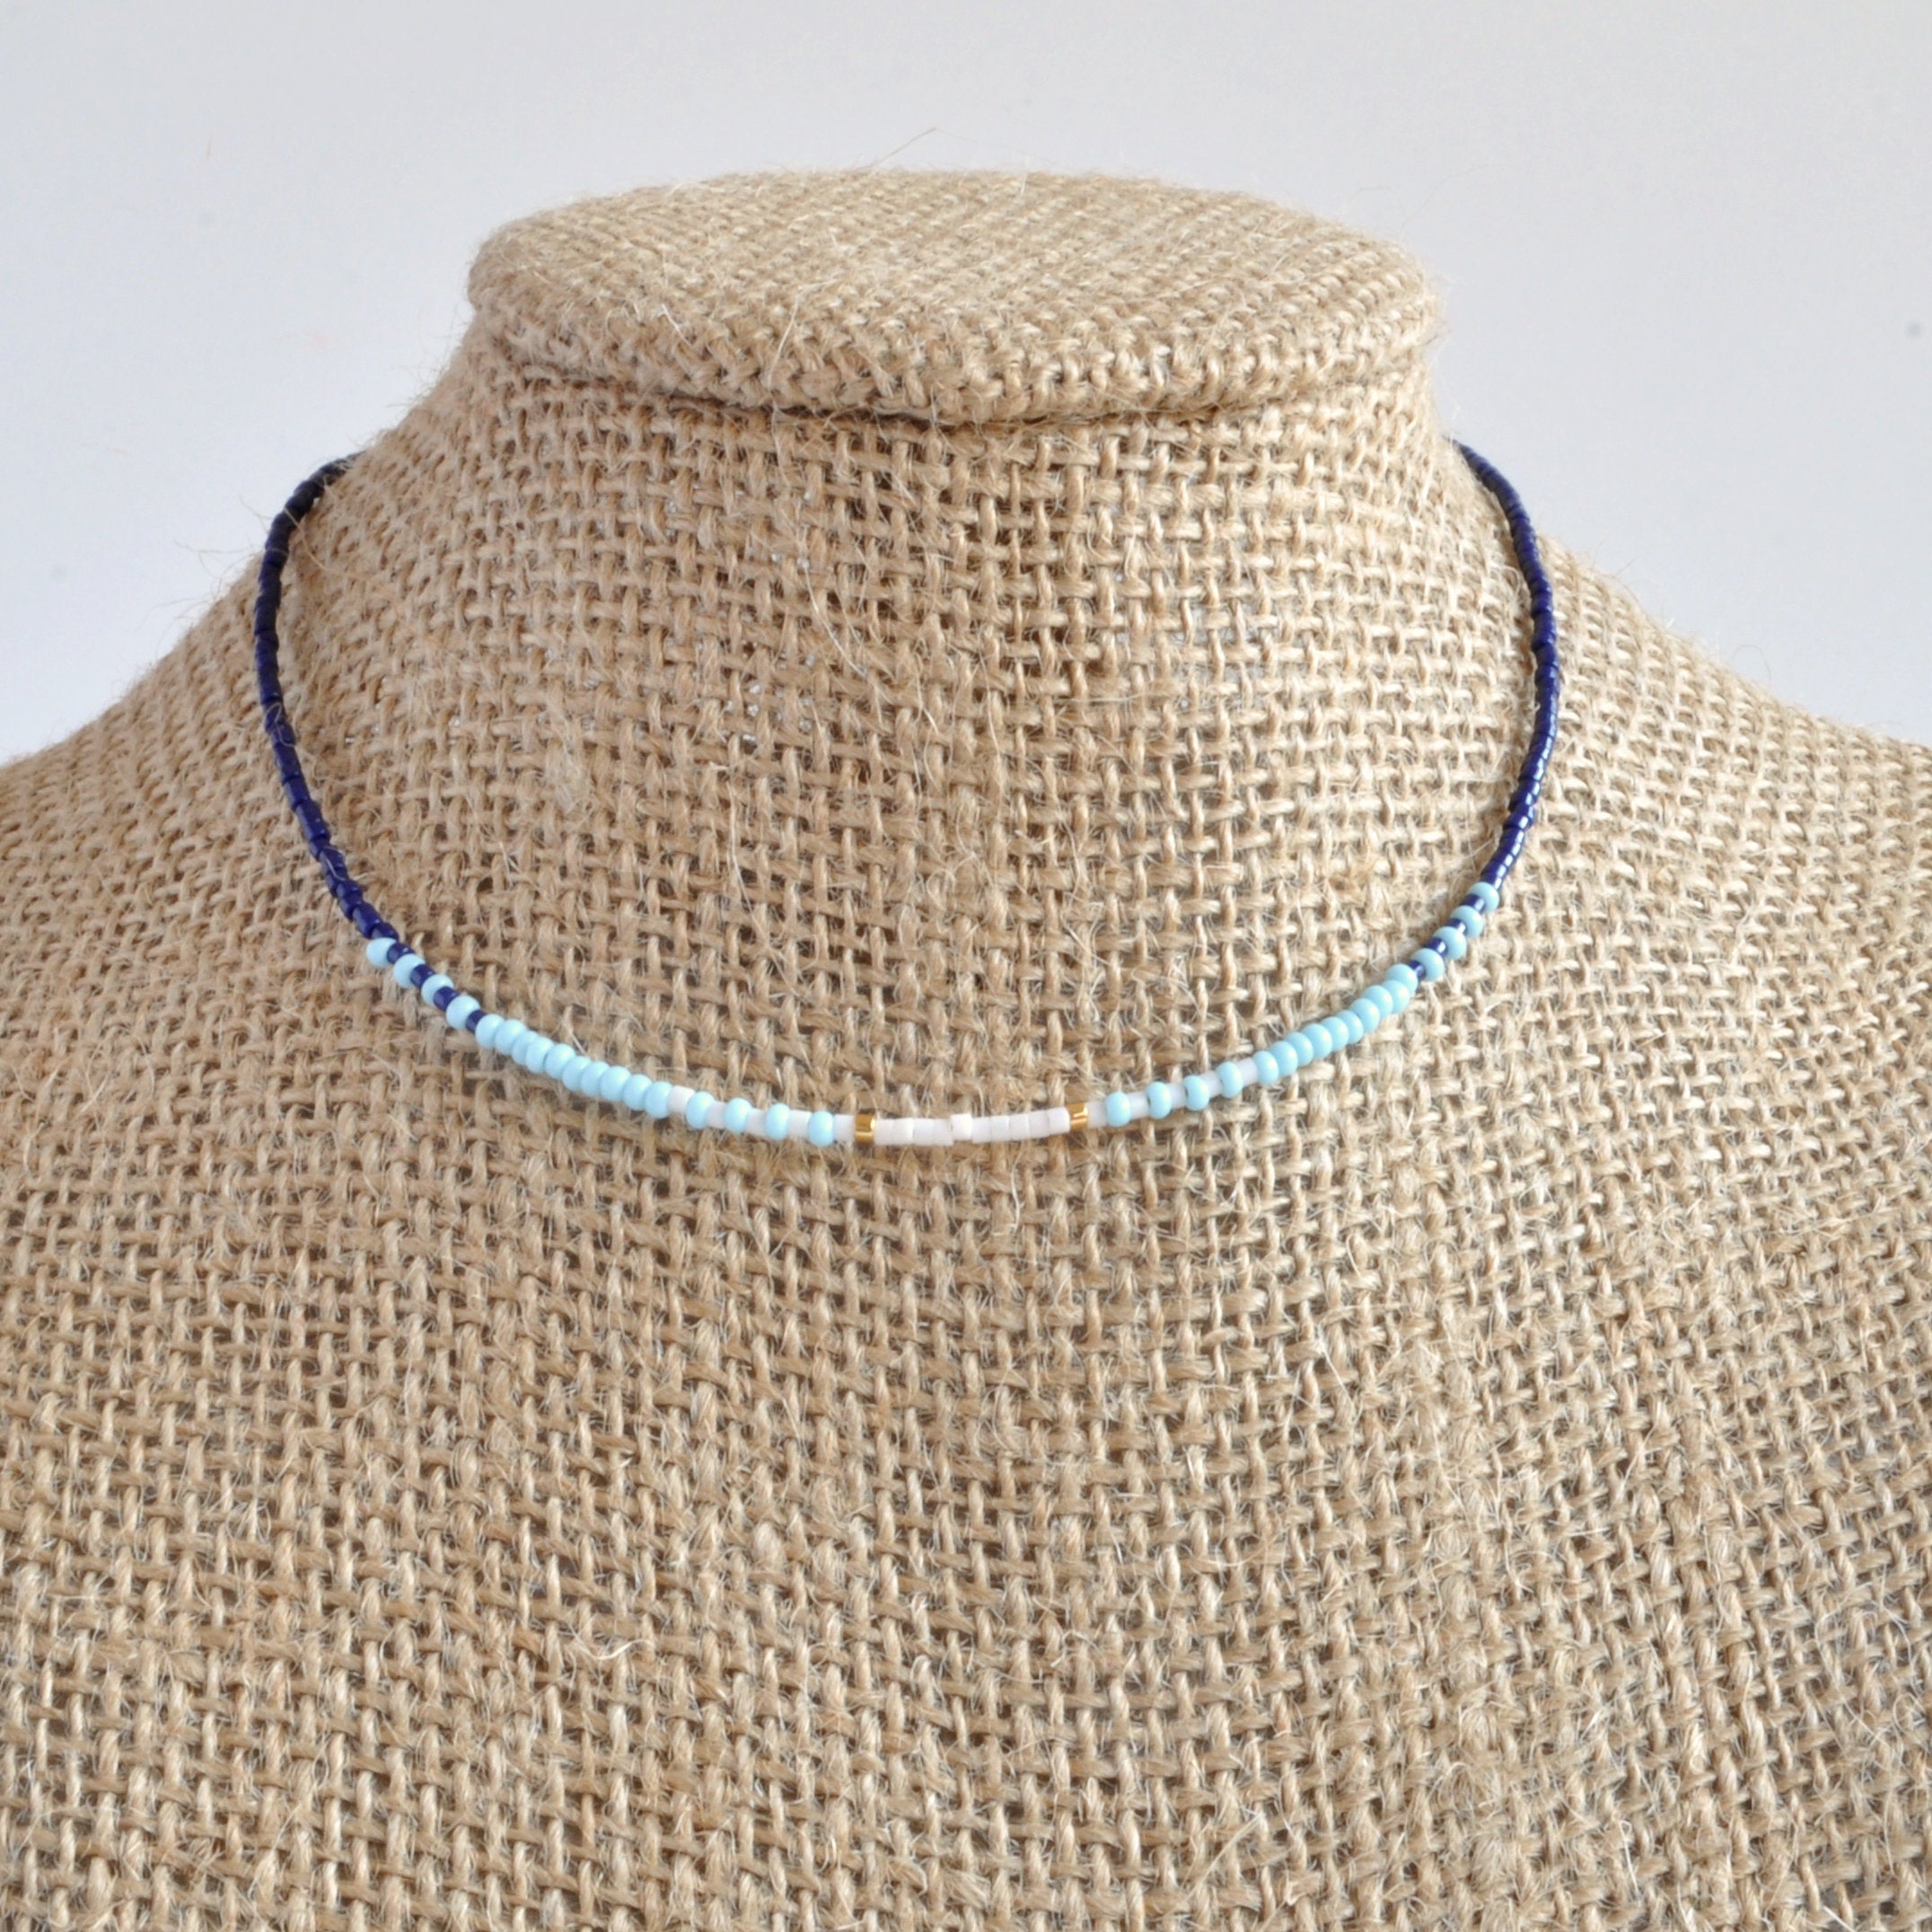 Libby & Smee Tailgate Choker Necklace in light blue navy and white on mannequin